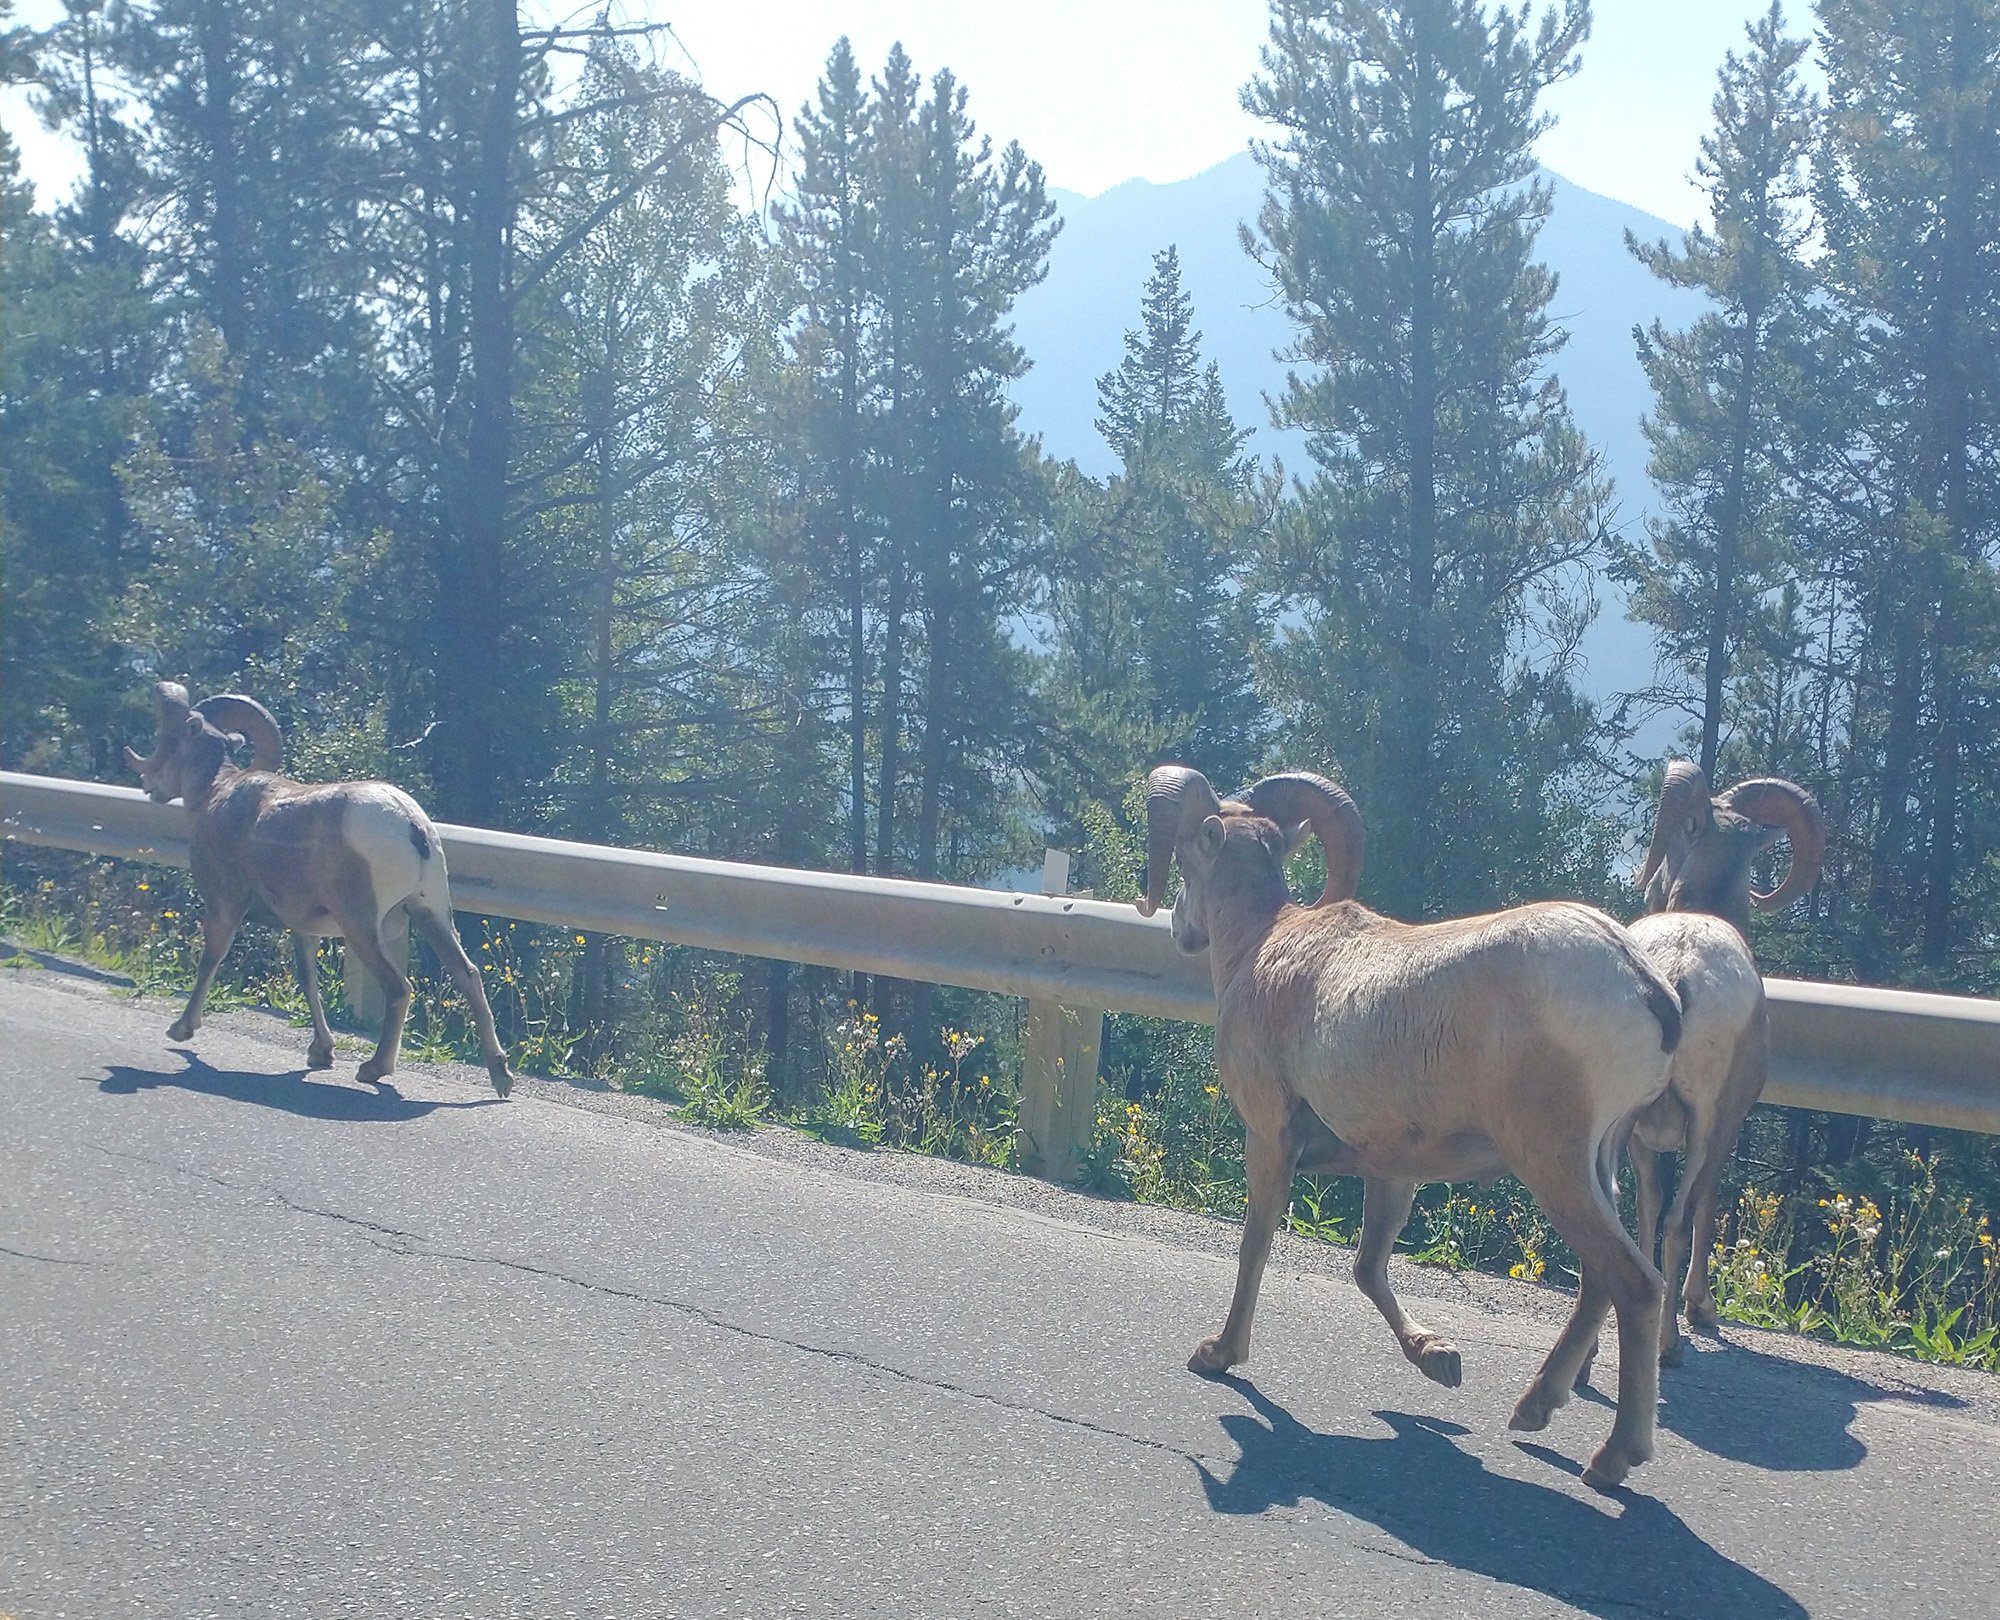 Saw the rams again on the way down as they were descending the mountain.